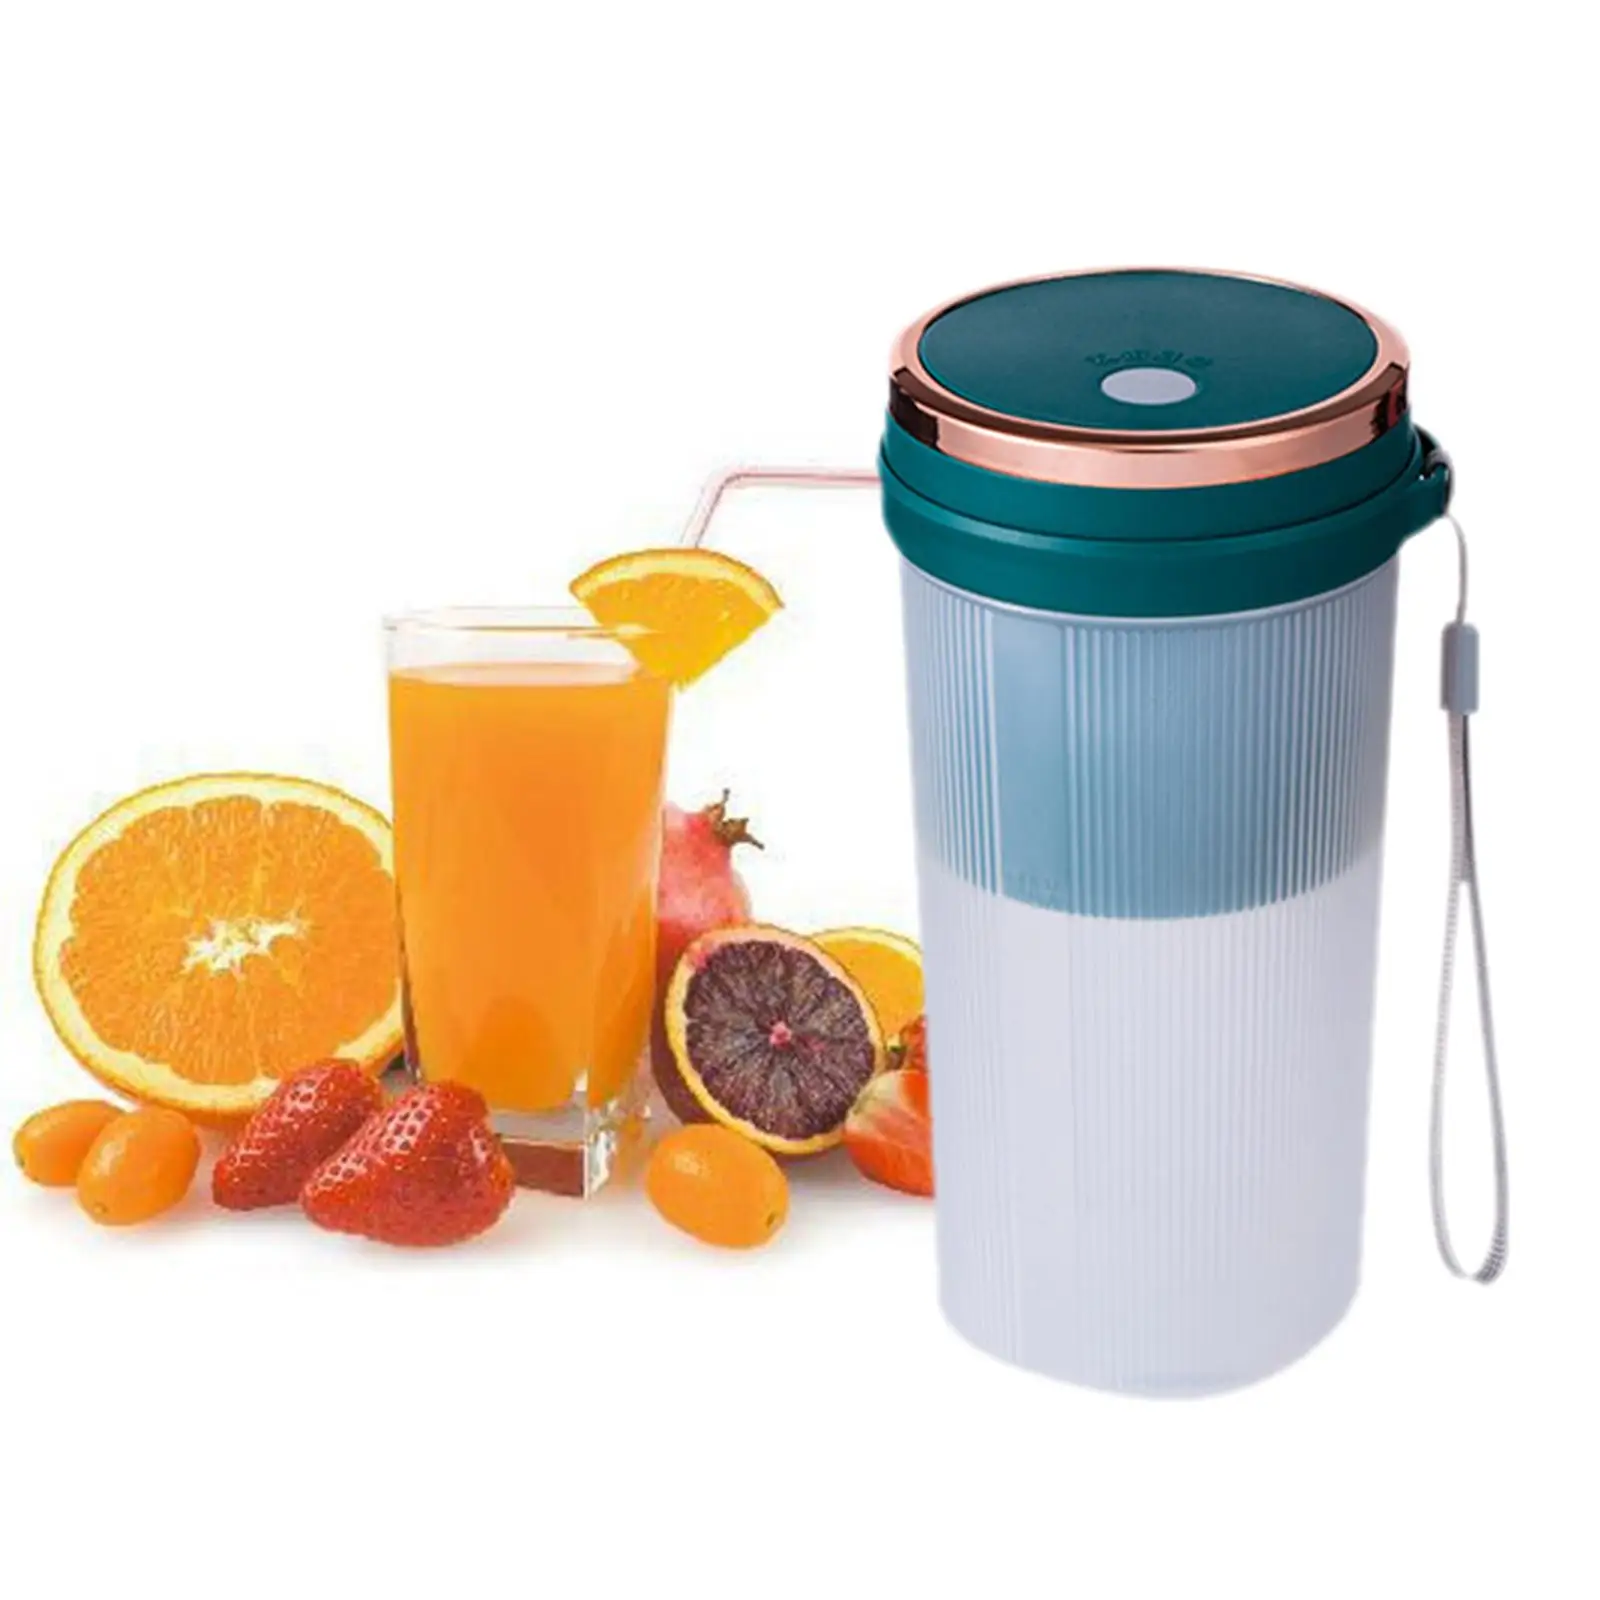 Portable Juicer Blender, Juice Cup USB Reable Mixer Cup Personal